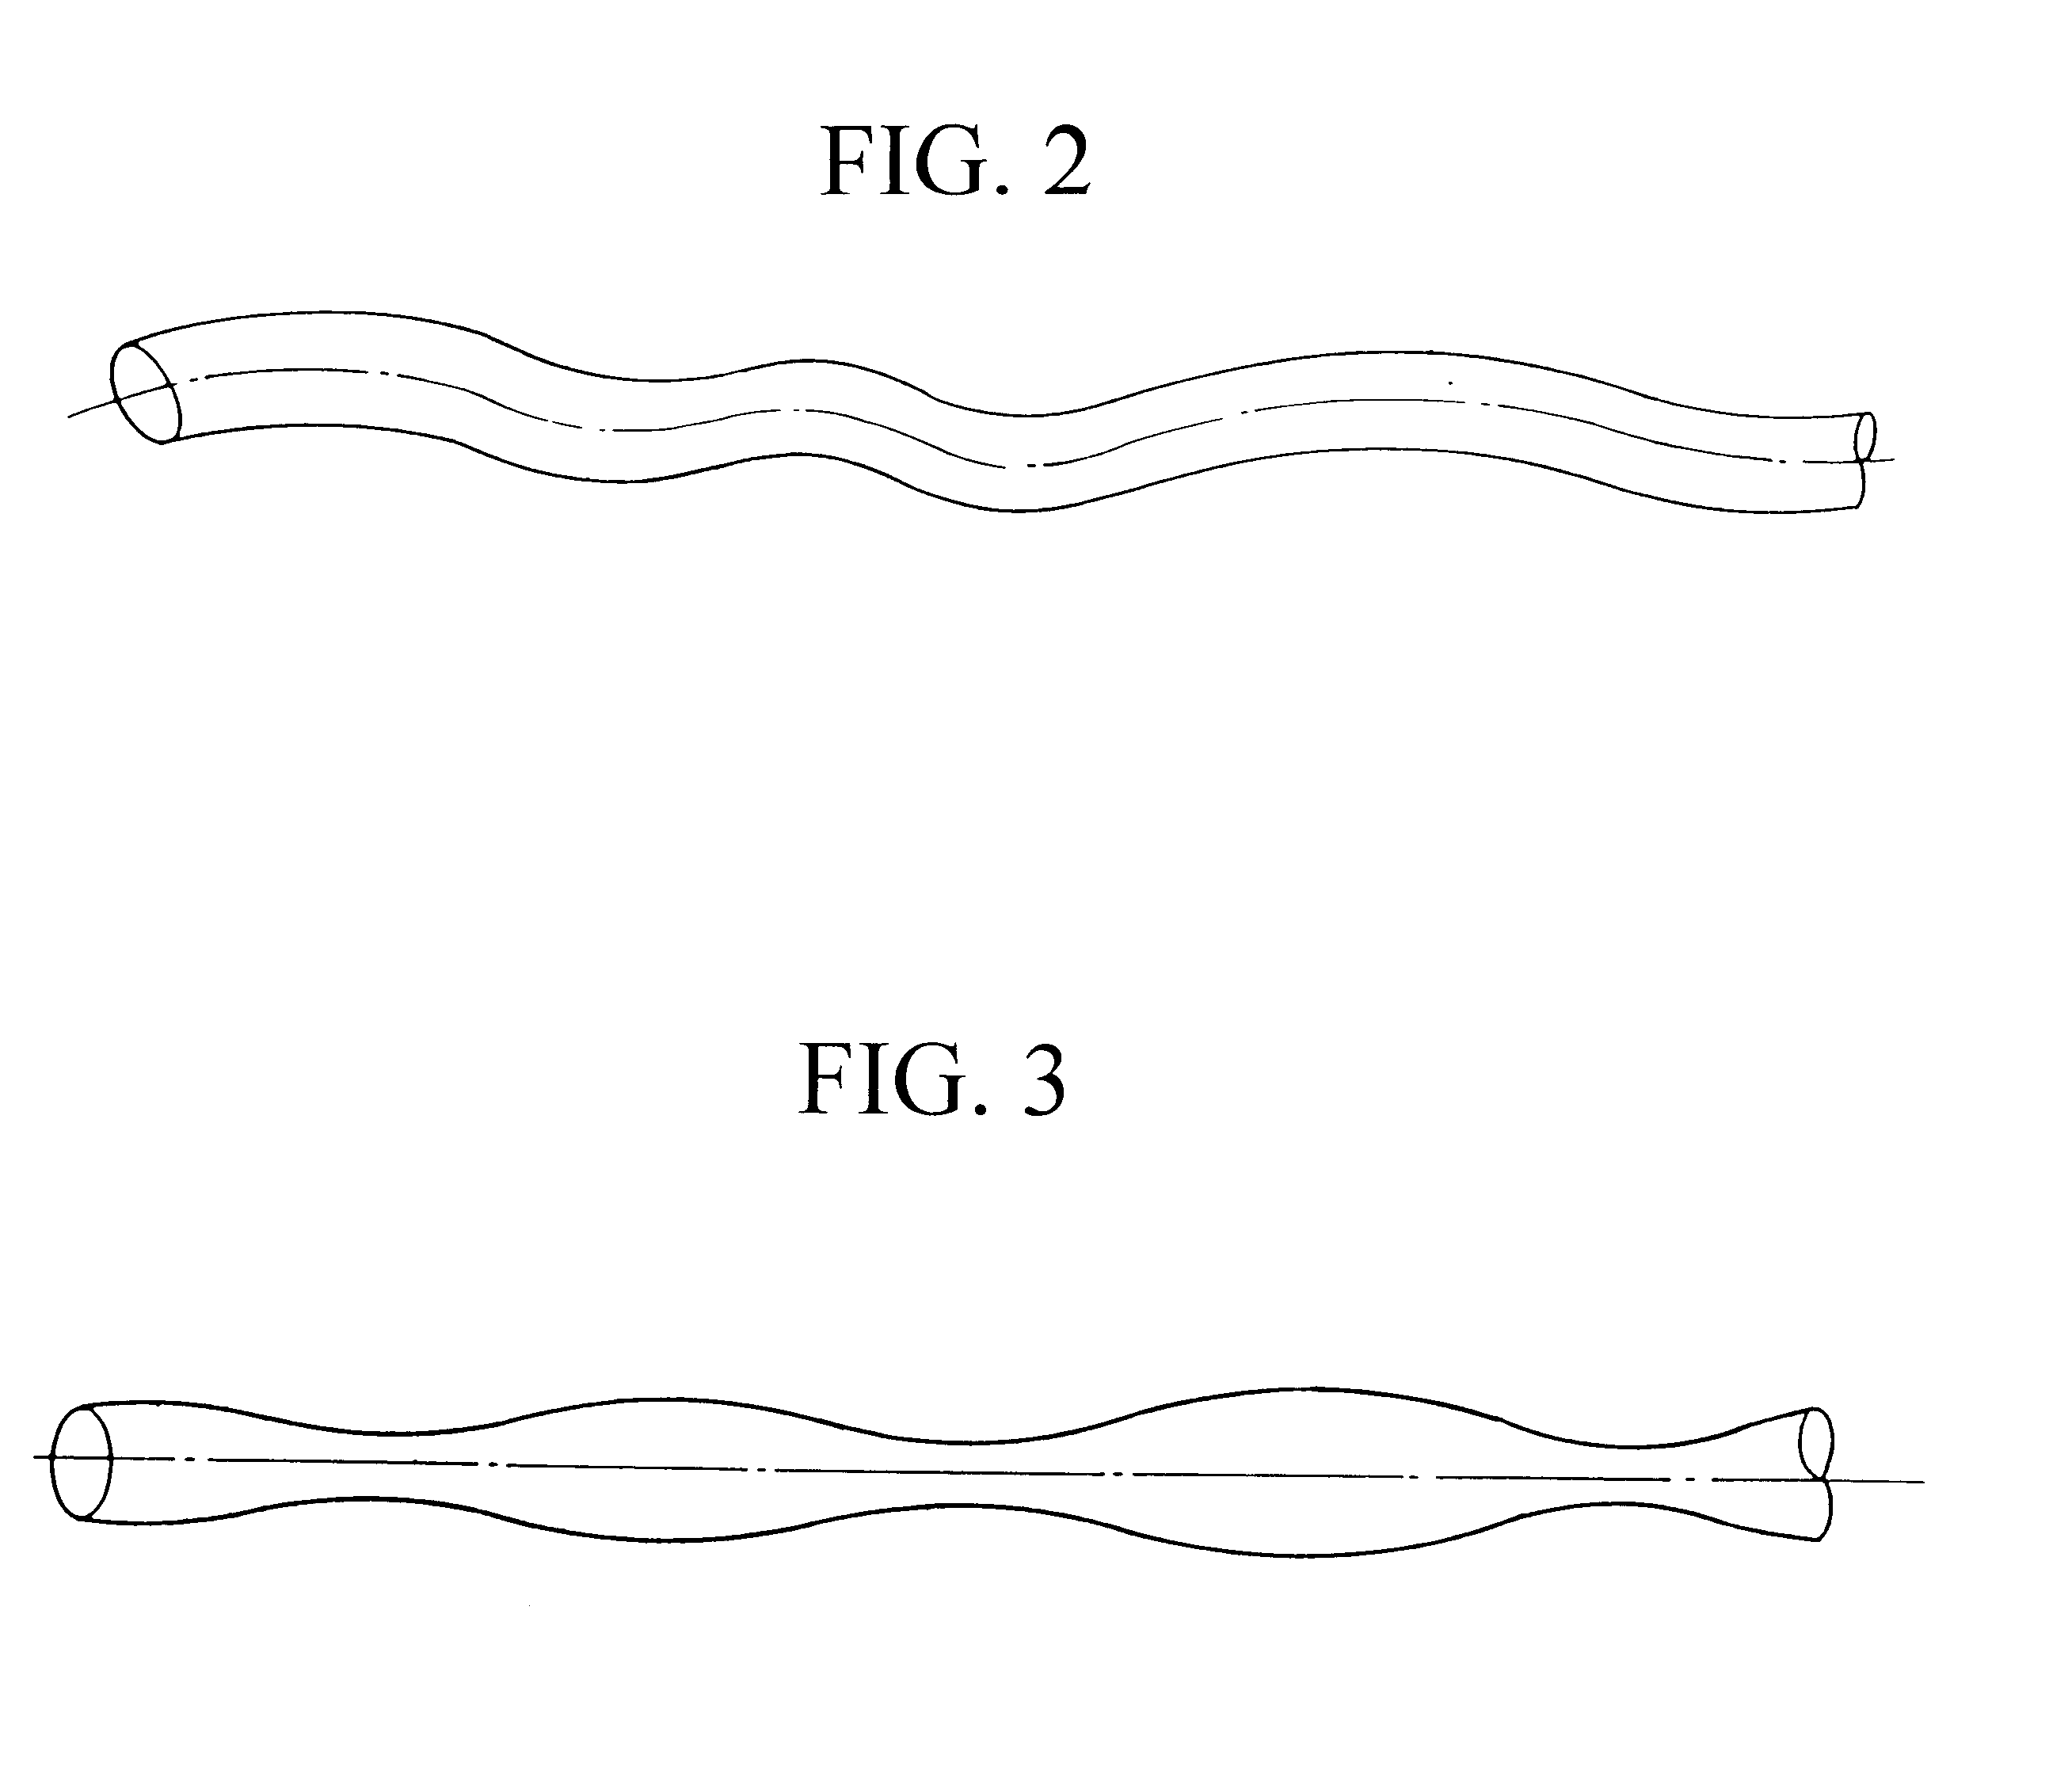 Multimode optical fiber with a higher order mode removing function